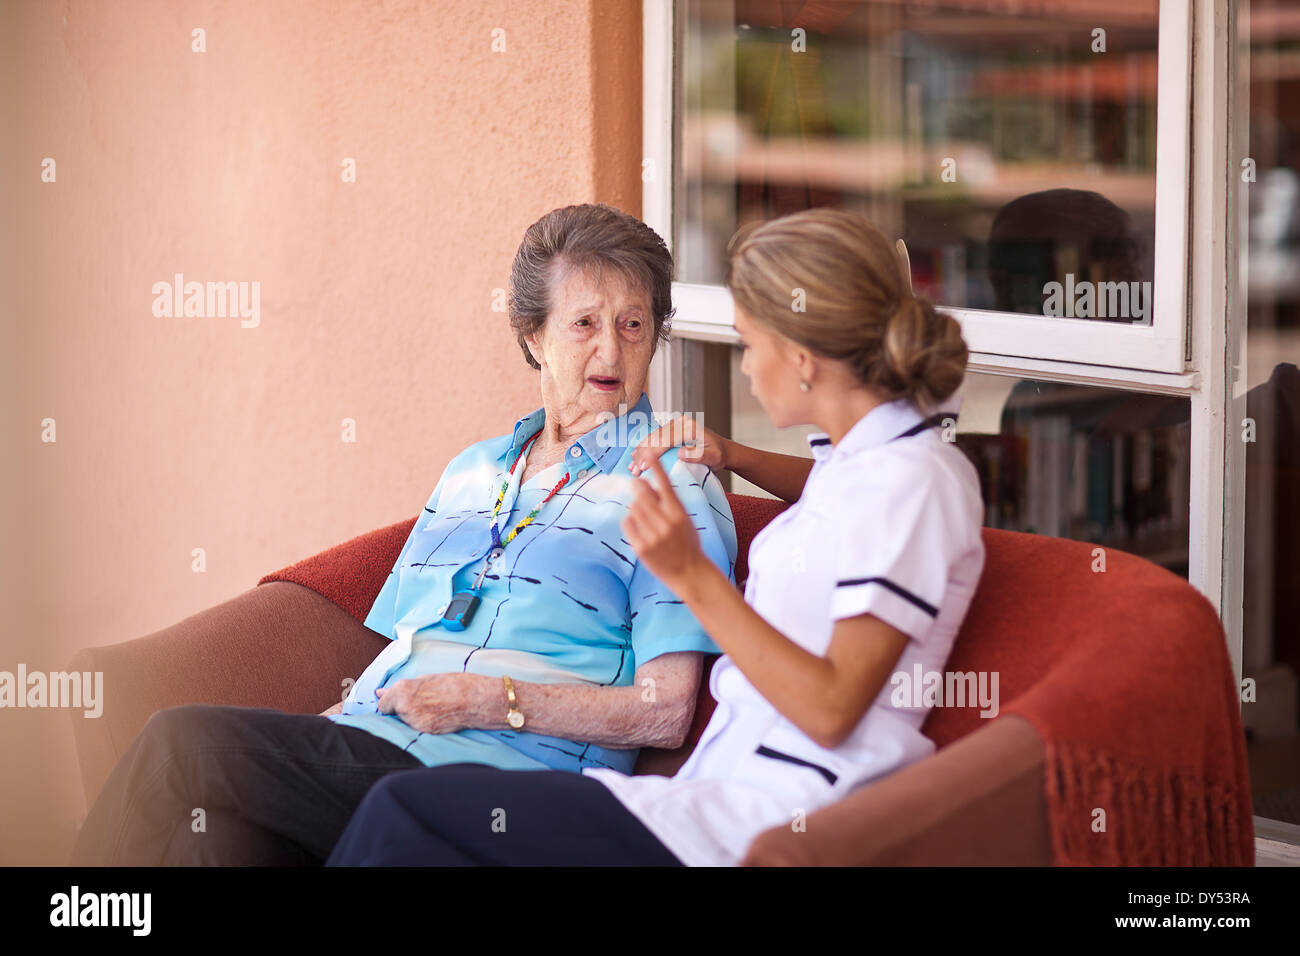 Care assistant chatting to senior woman on sofa Stock Photo